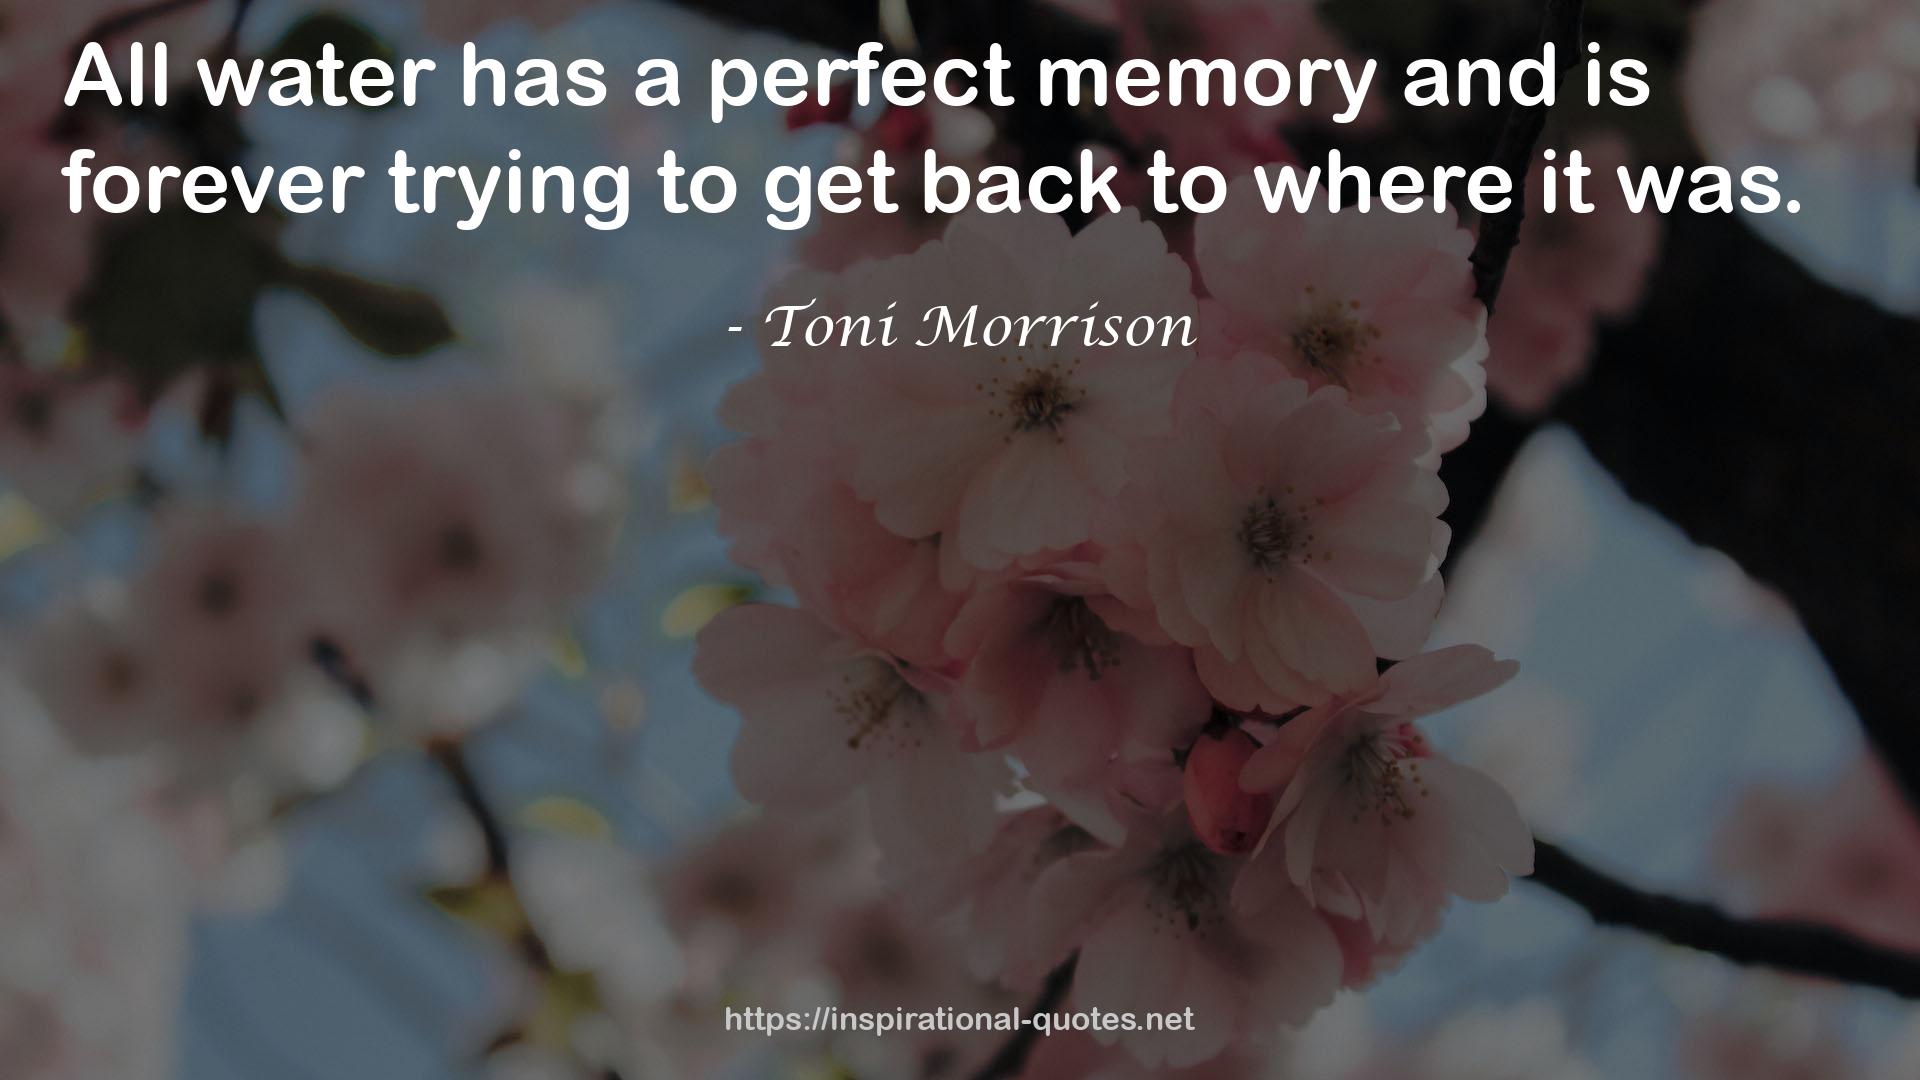 a perfect memory  QUOTES